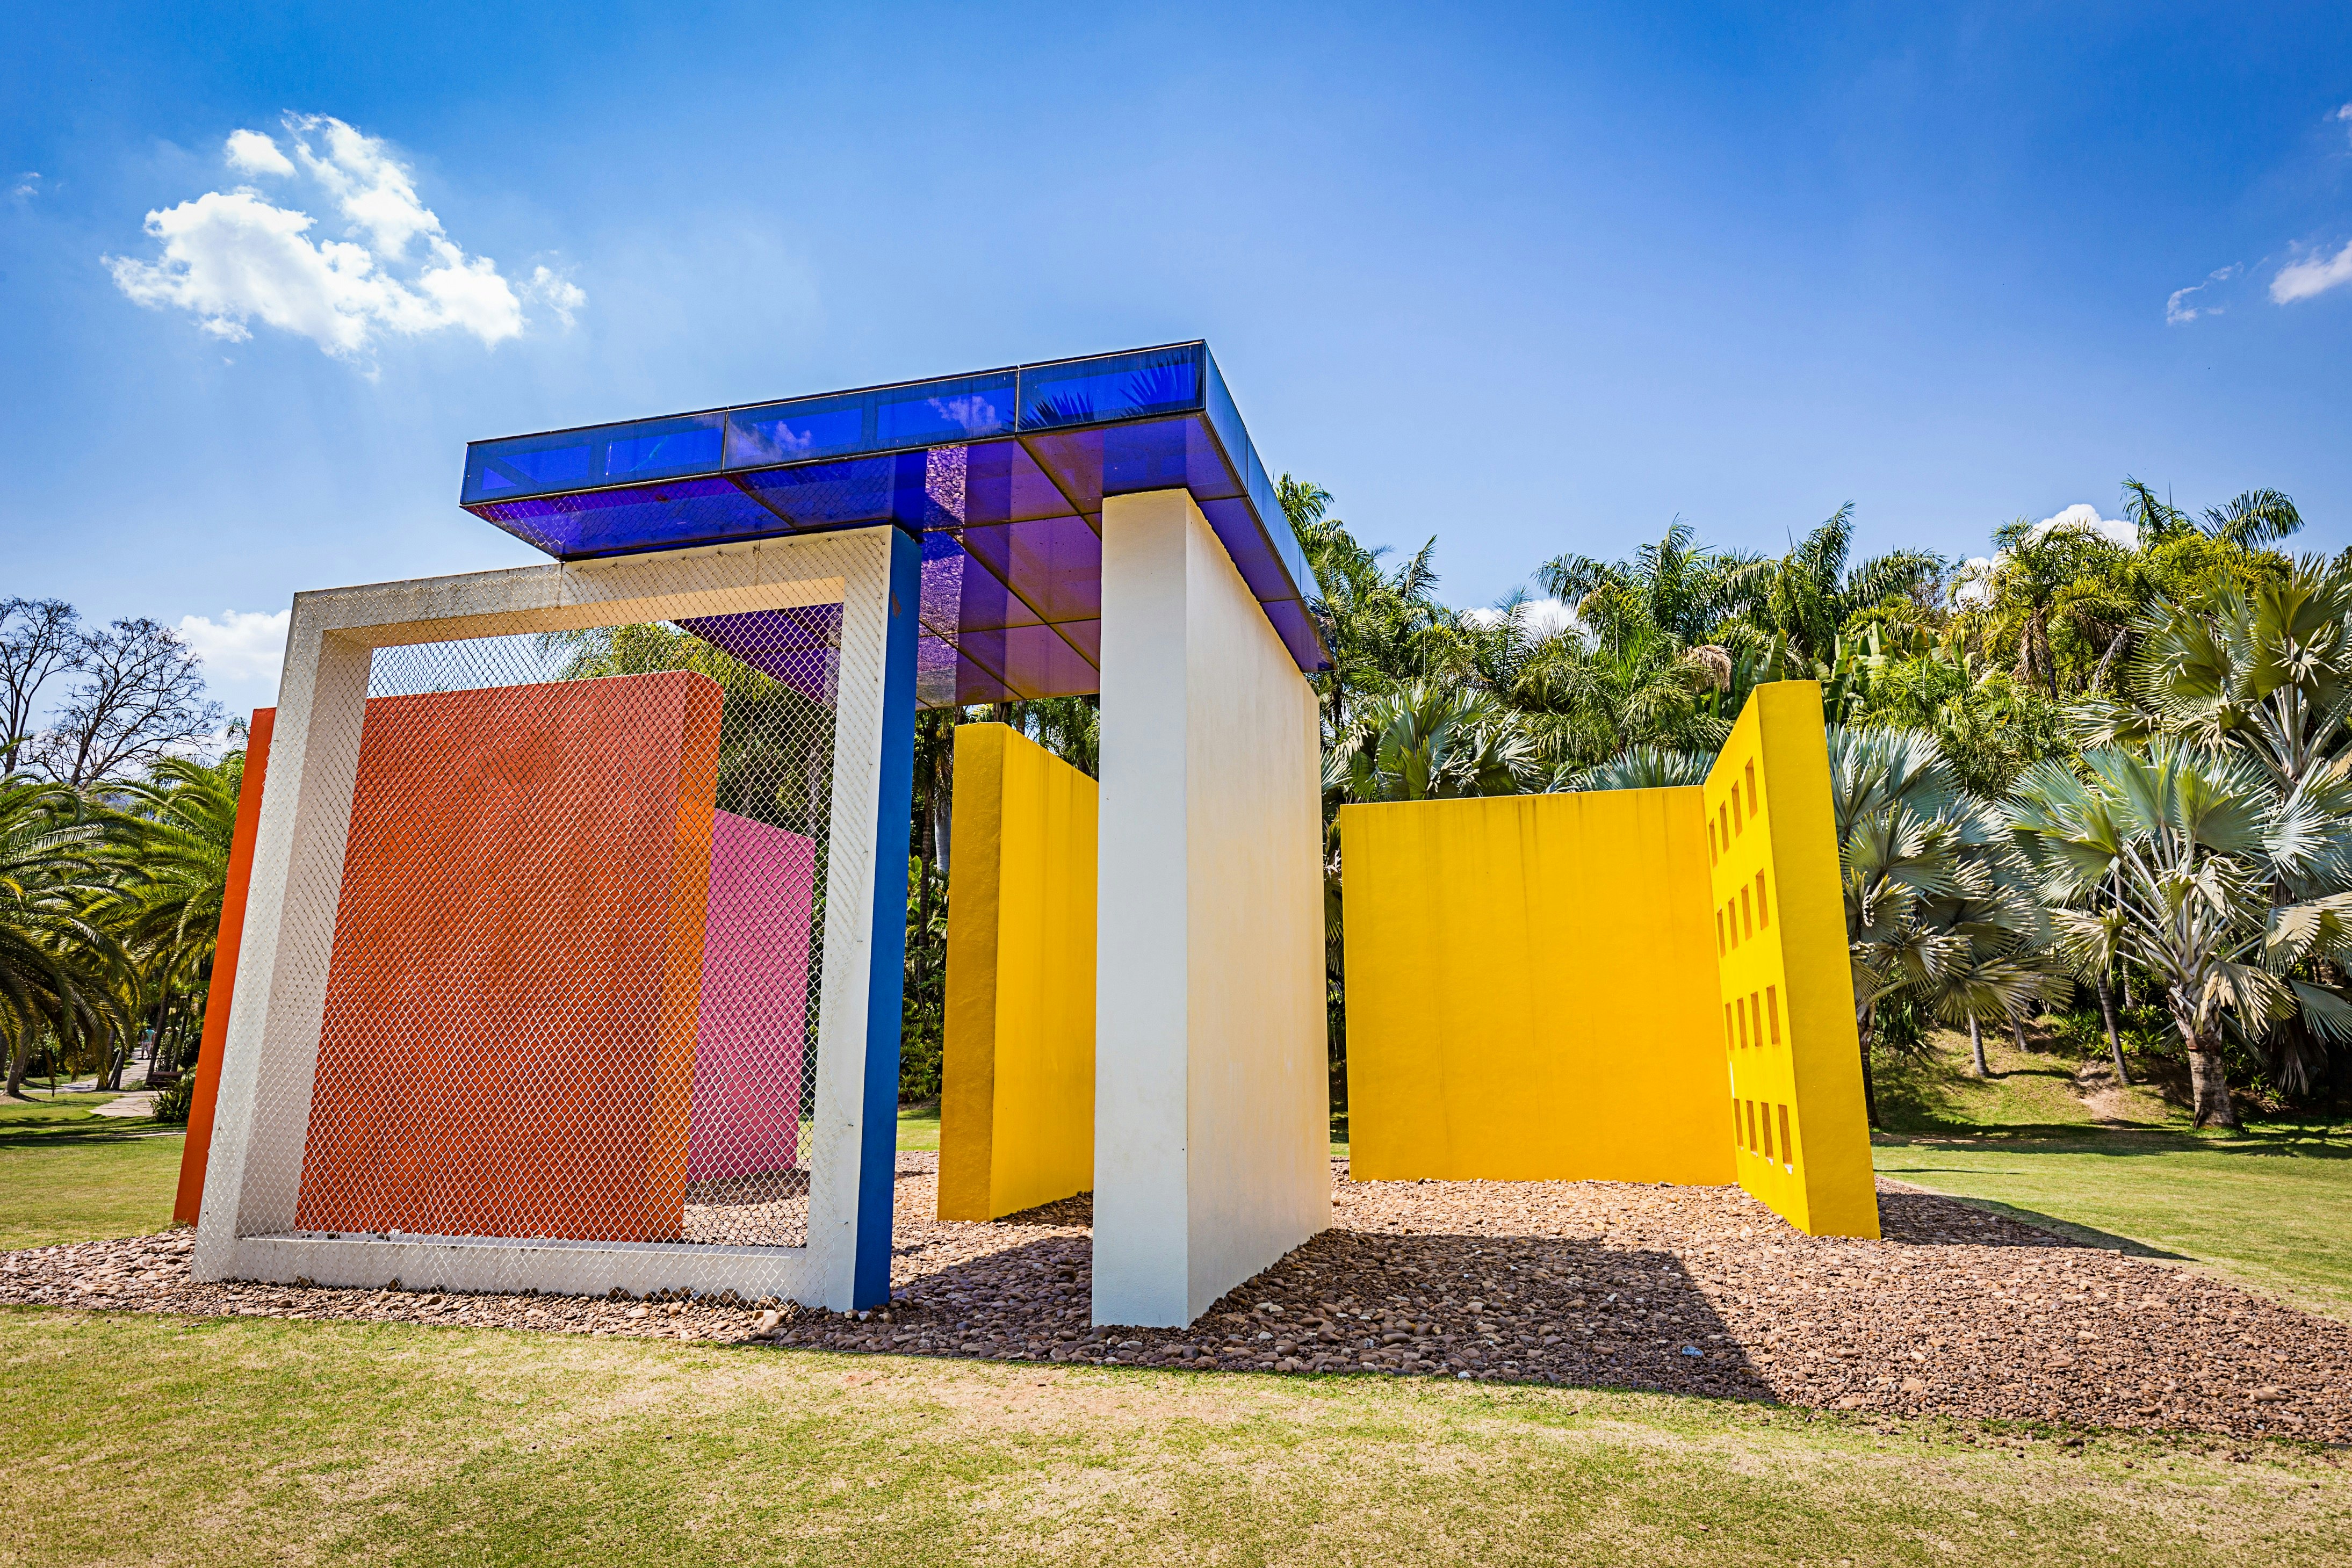 One of the works at huge open-air art museum Instituto de Arte Contemporânea Inhotim; it consists of different-coloured squares of concrete and glass, with tropical trees and plants behind it. 